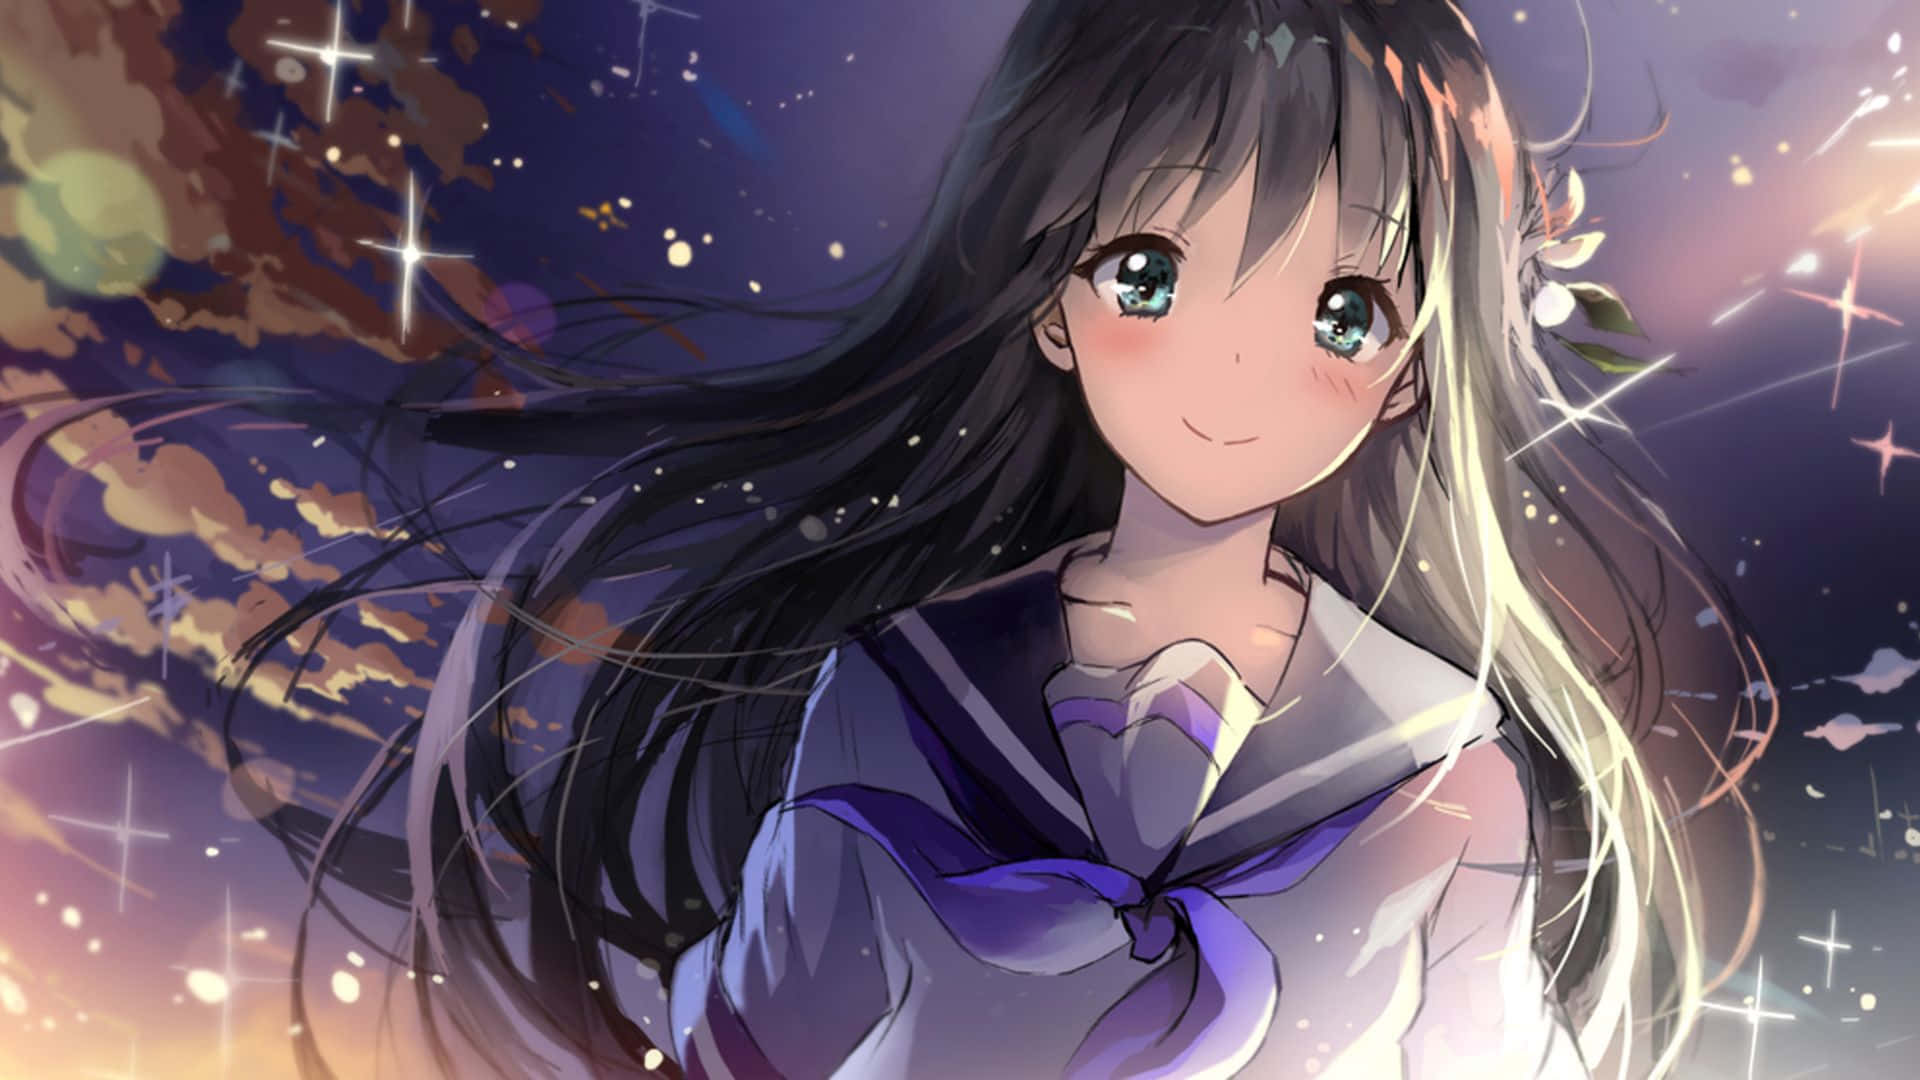 Anime Girl With Long Hair And A Starry Sky